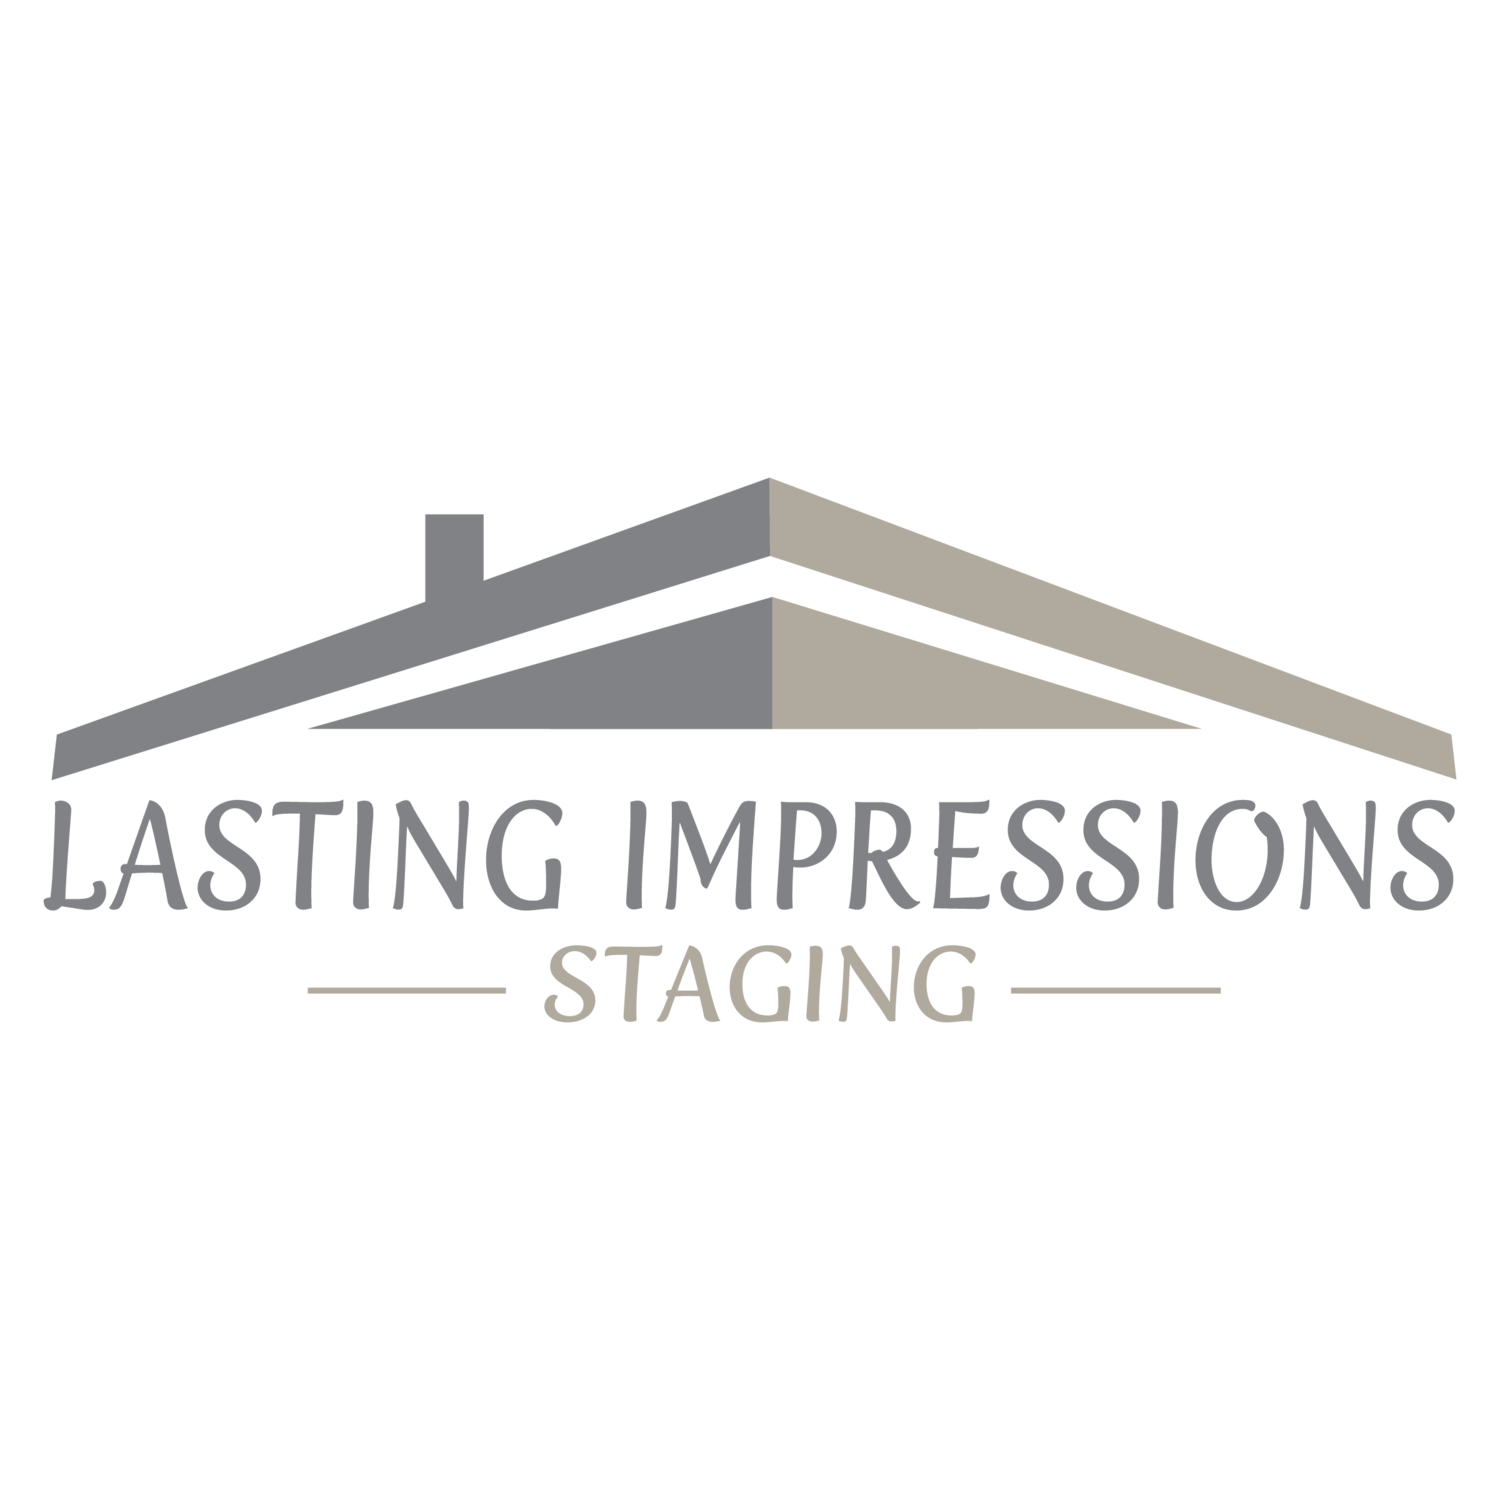 Lasting Impressions Staging